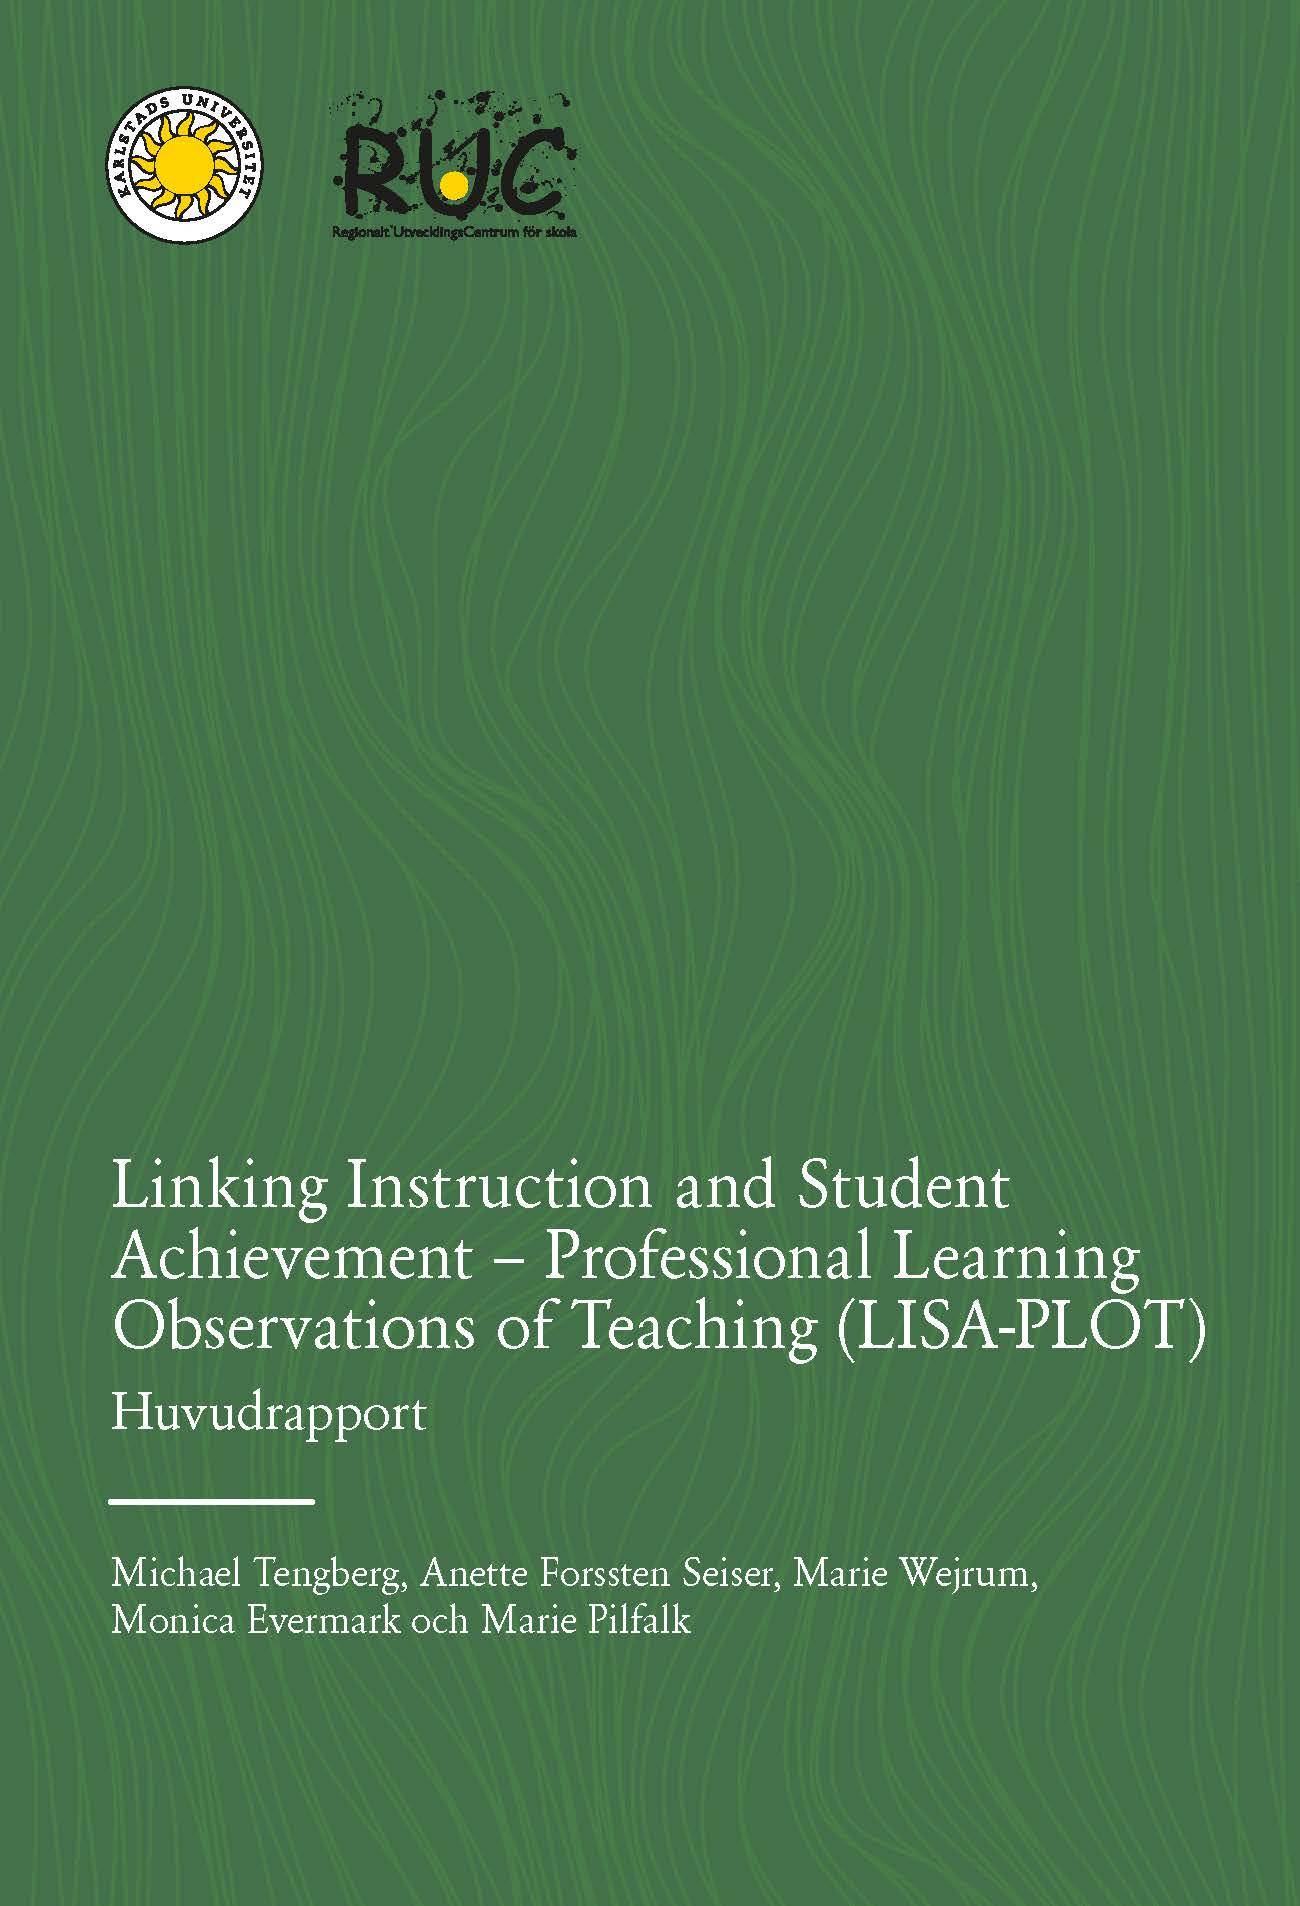 Linking Instruction and Student Achievement - Professional Learning Observations of Teaching (LISA-PLOT): Huvudrapport